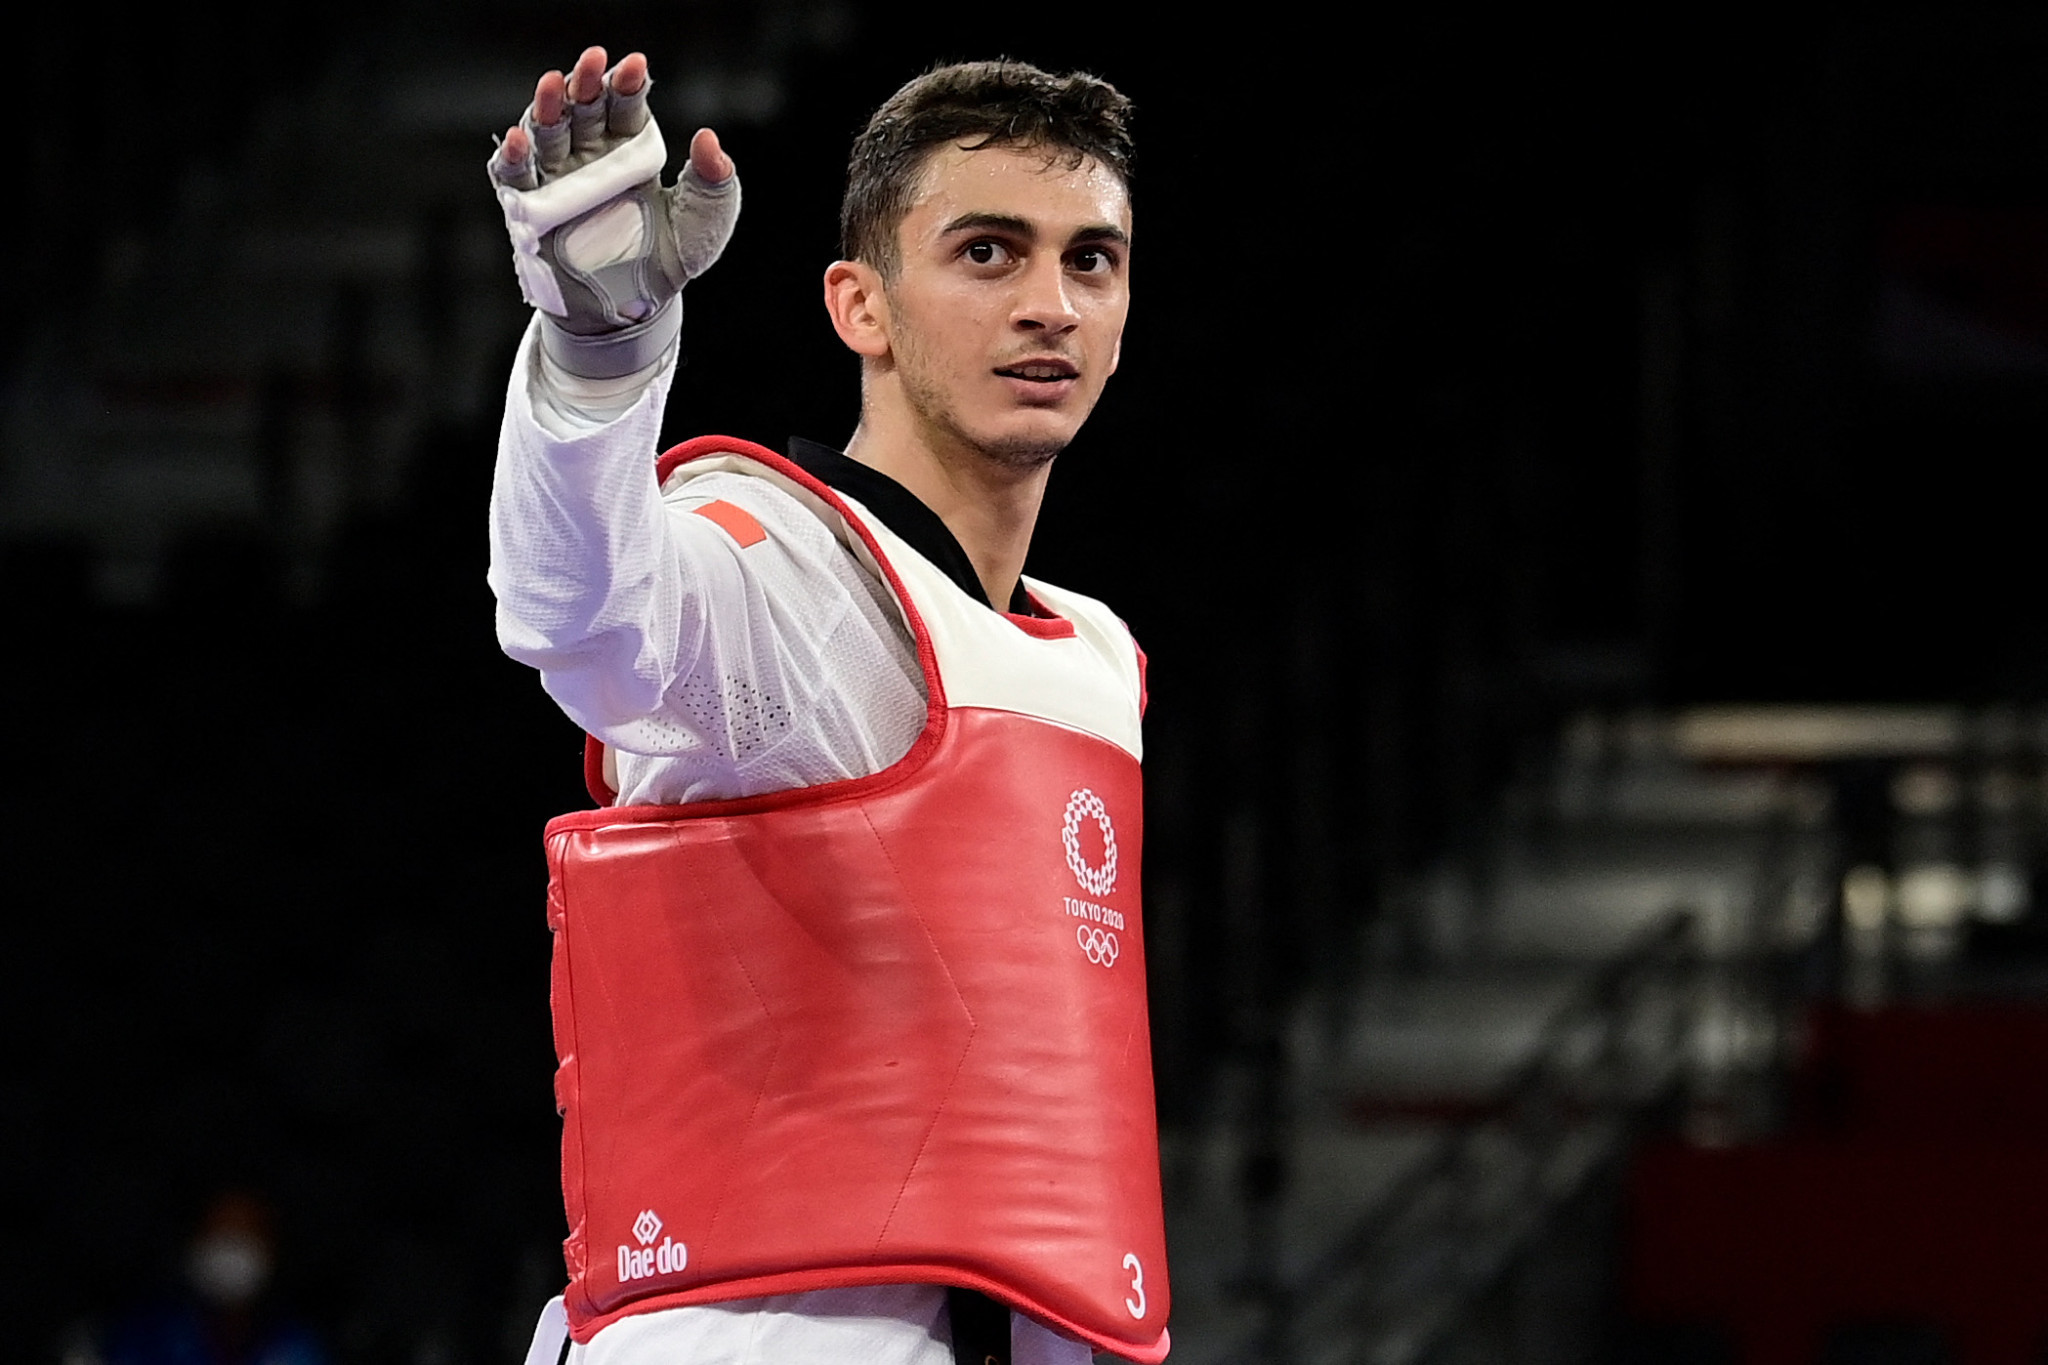 Olympic gold medallists Dell'Aquila and Jelić poised for European Taekwondo Championships